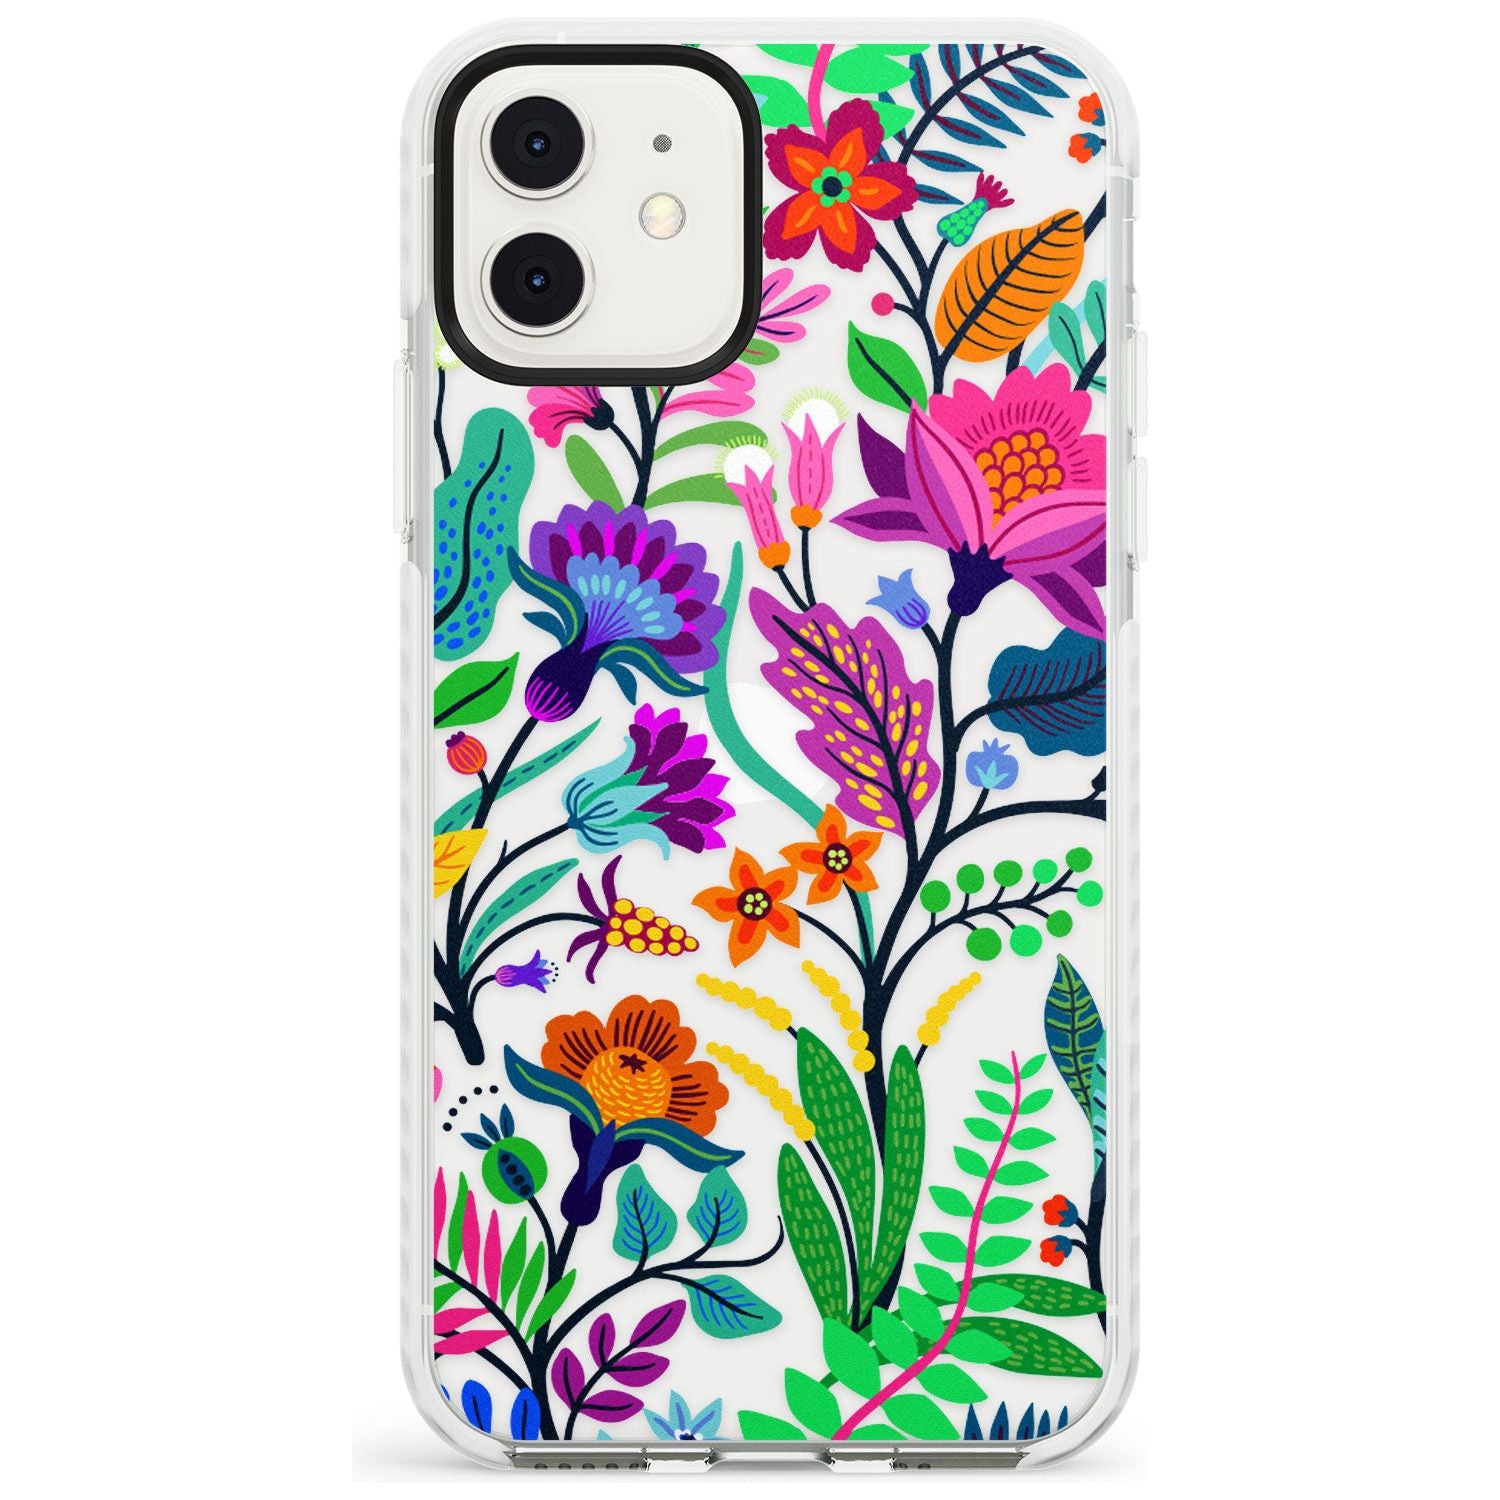 Floral Vibe Impact Phone Case for iPhone 11